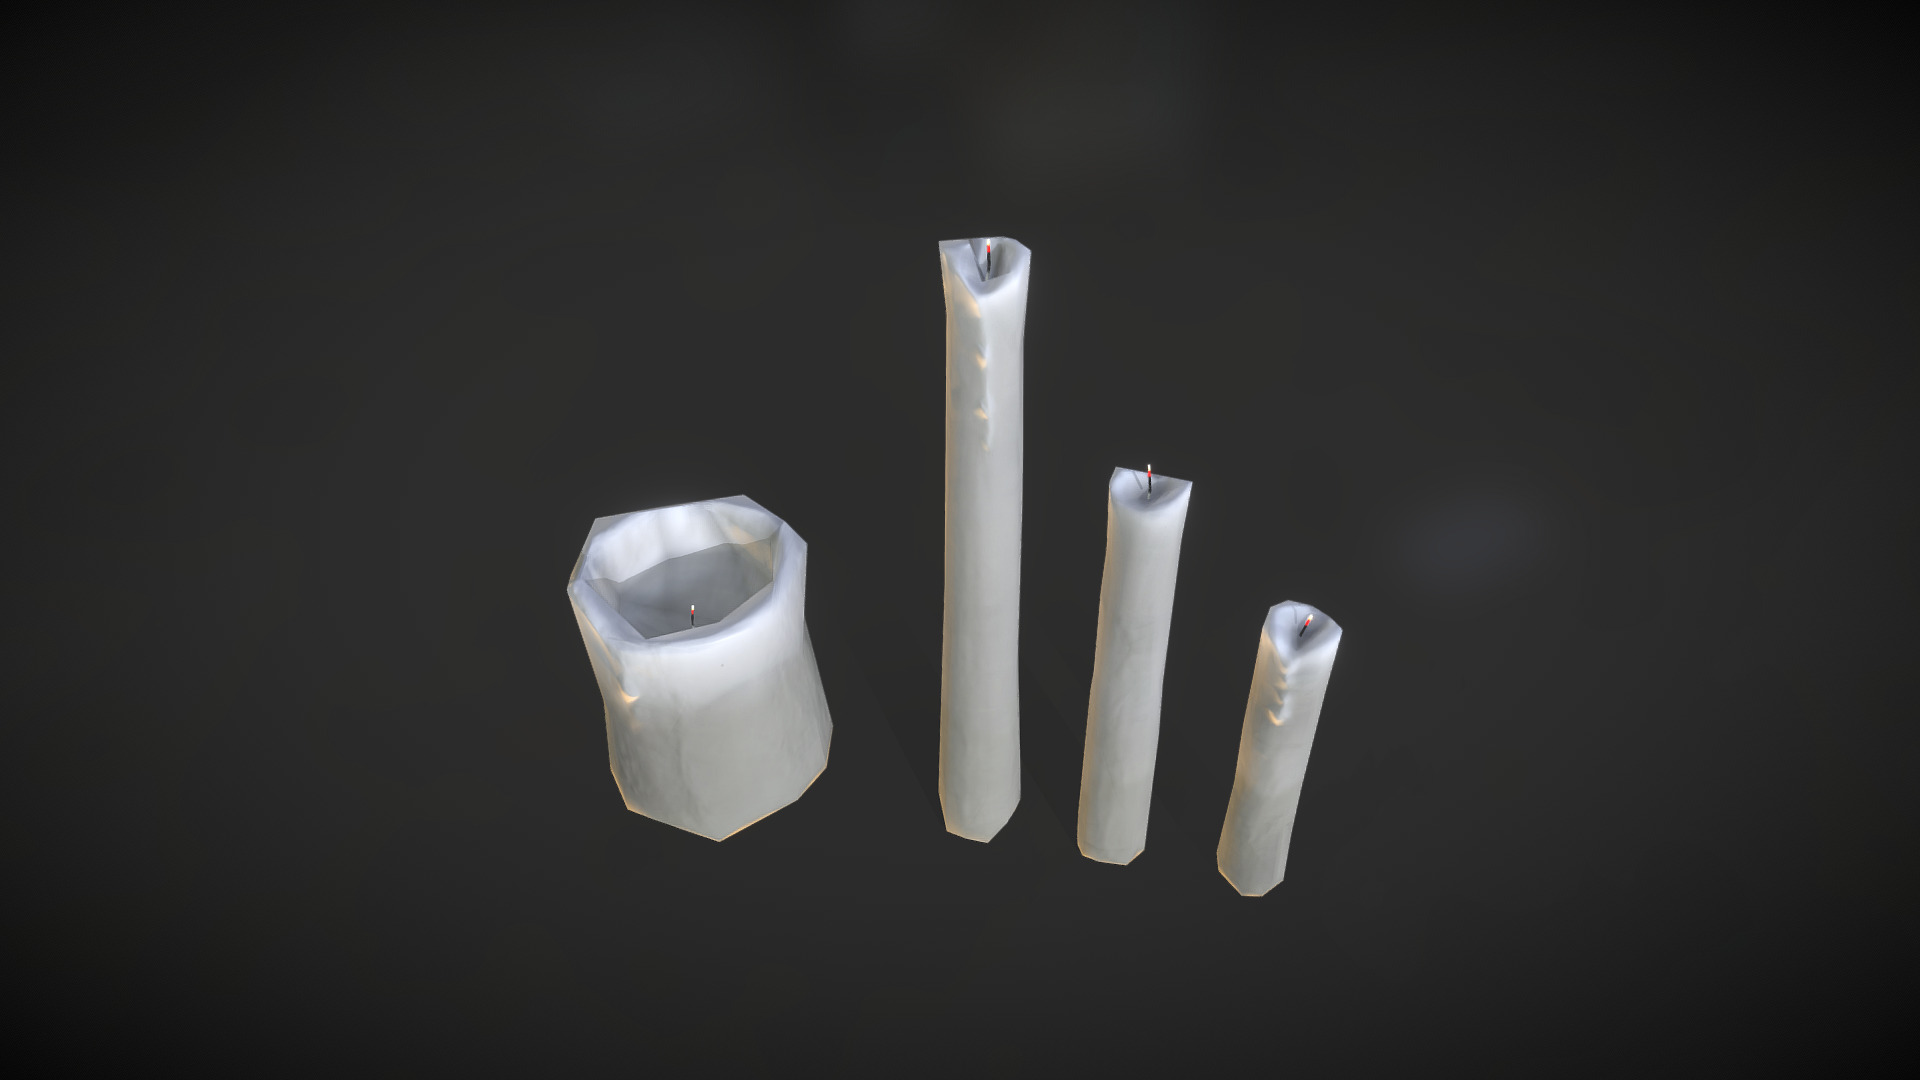 3D model Low-poly Candles - This is a 3D model of the Low-poly Candles. The 3D model is about a few white objects.